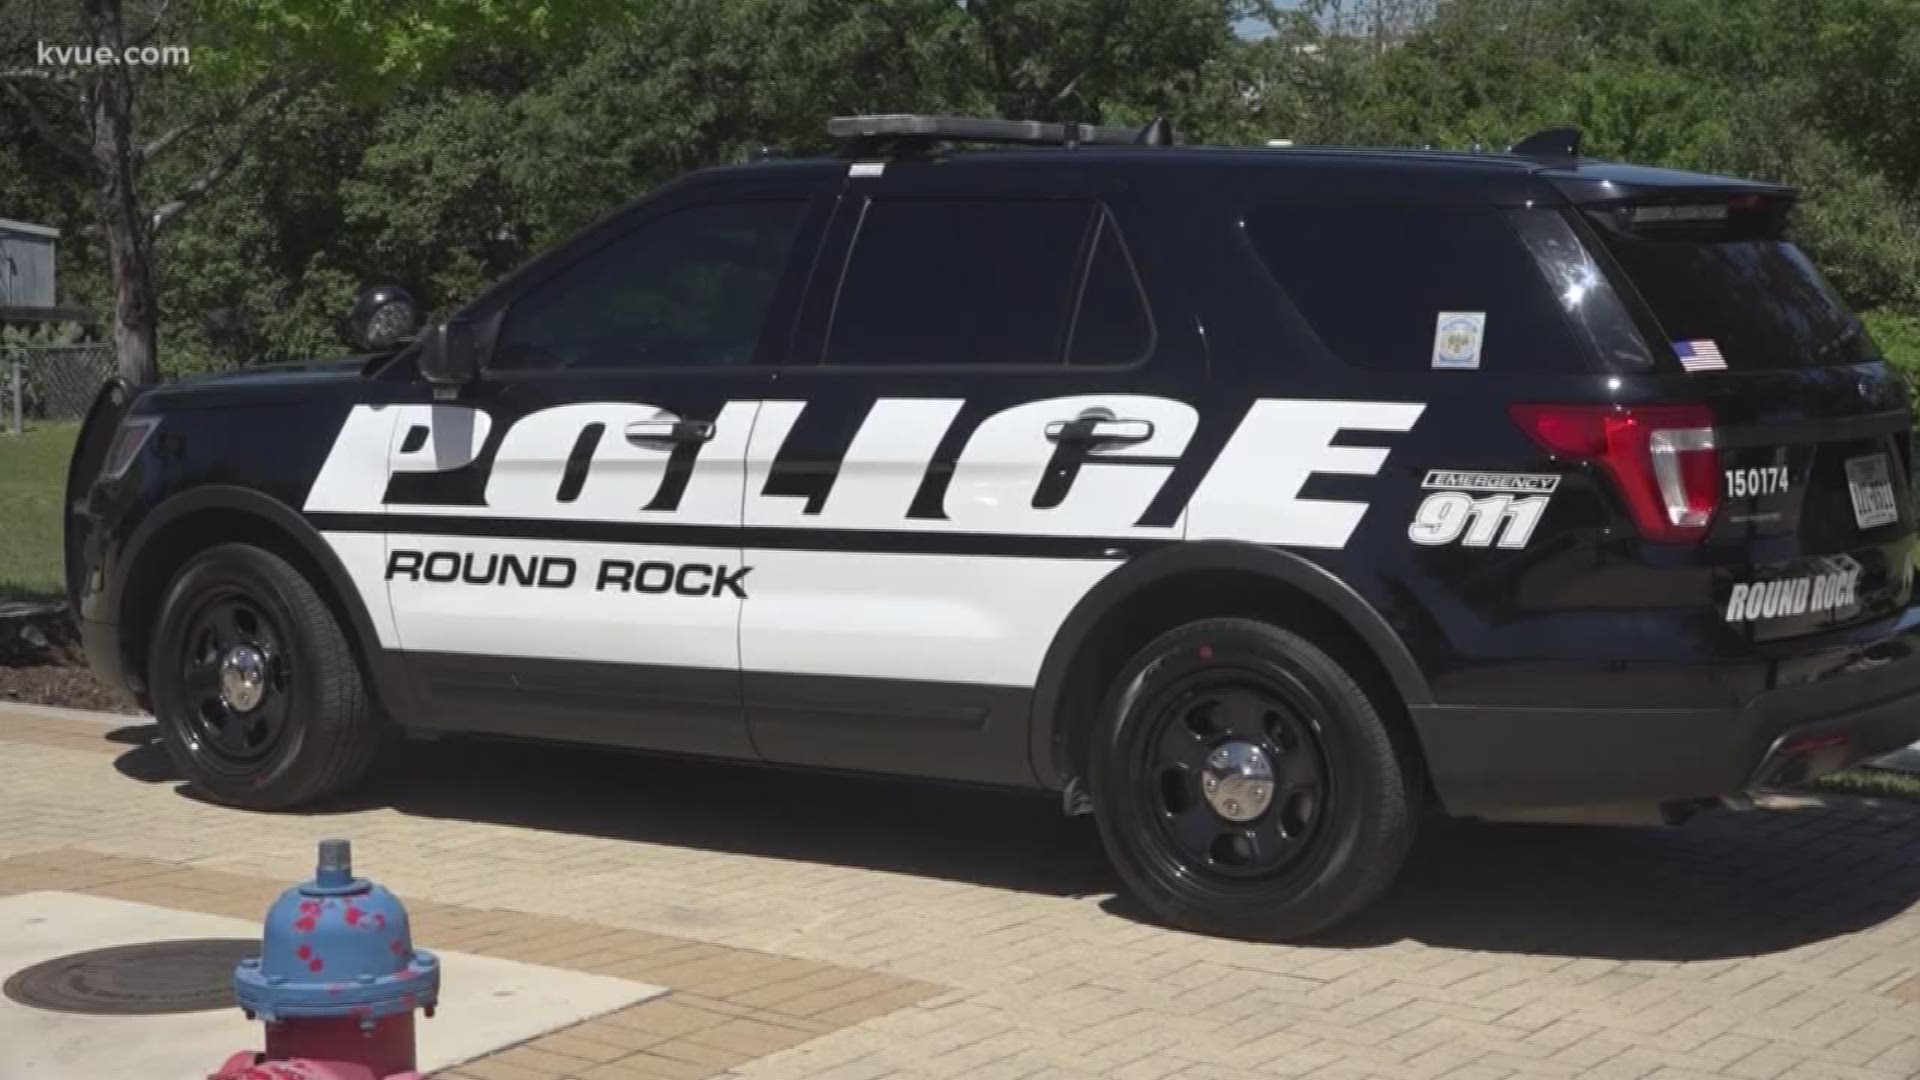 Members of the Round Rock community are proving that the family of an injured police officer is not alone in his recovery.